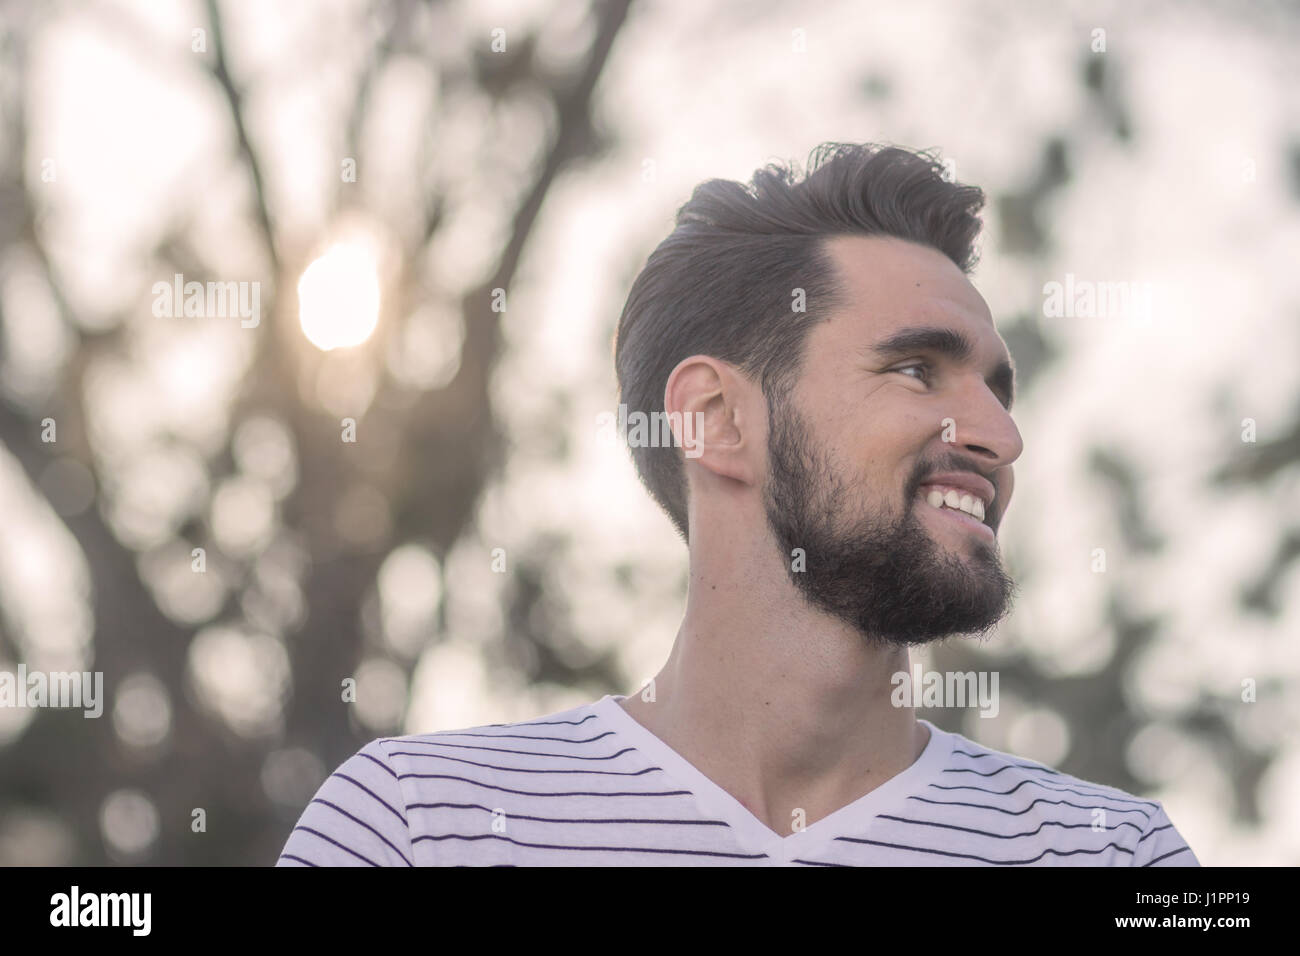 One smiling young adult man, looking sideways, head, face close up. Wearing t-shirt, outdoors nature. Low angle shot. Sun. Stock Photo